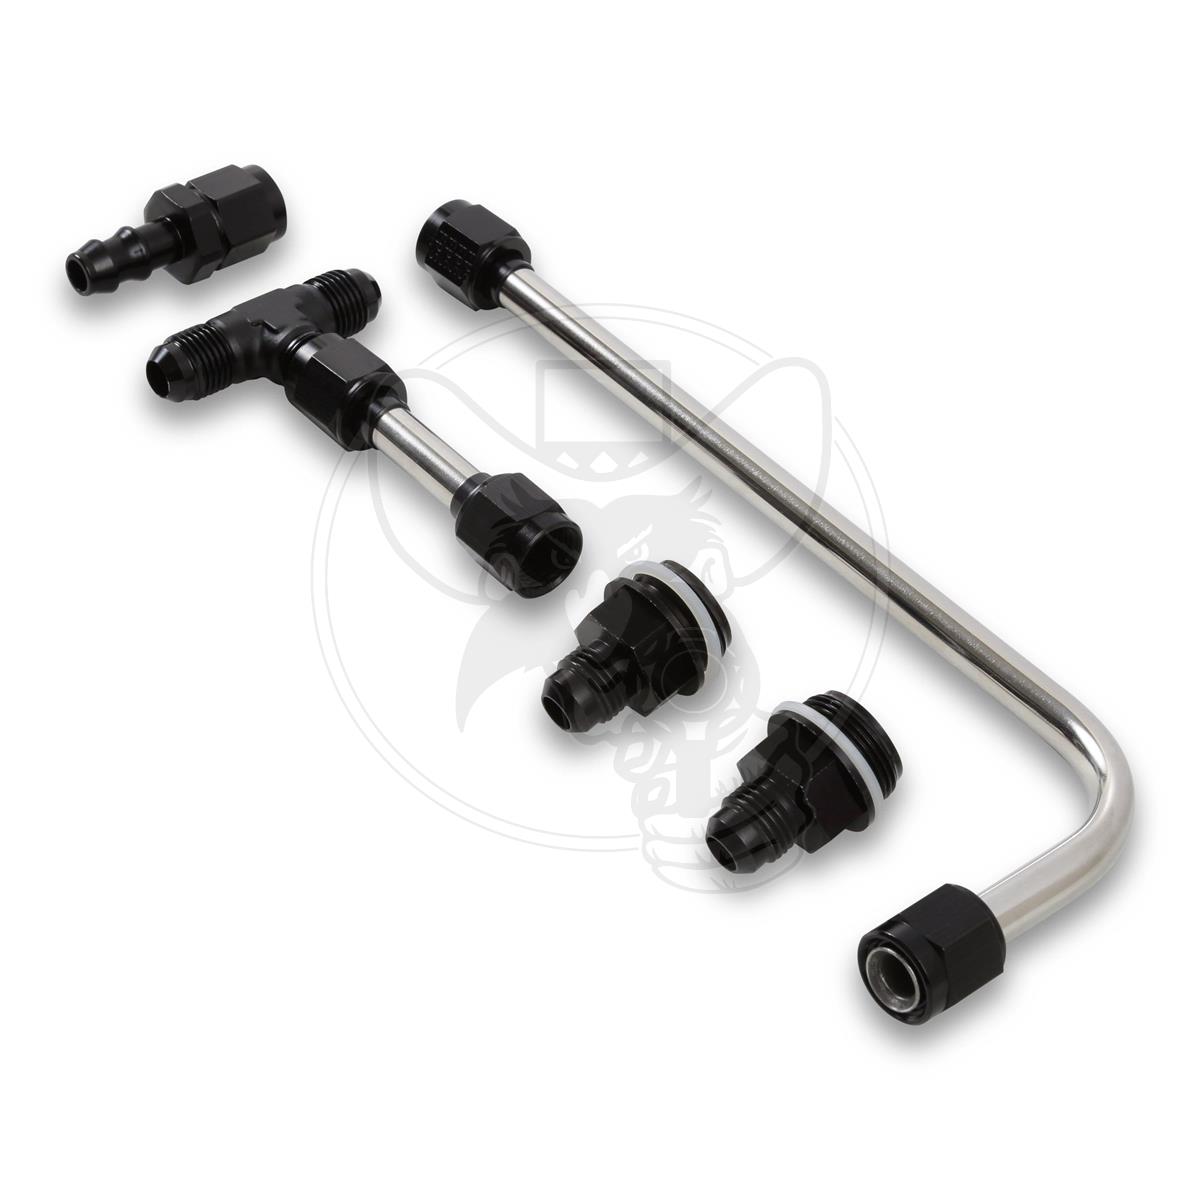 Q34-600SL-BLK - QUICKFUEL CARBY SLAYER & 4160 -6AN FUEL LINE DUAL INLET  BLACK